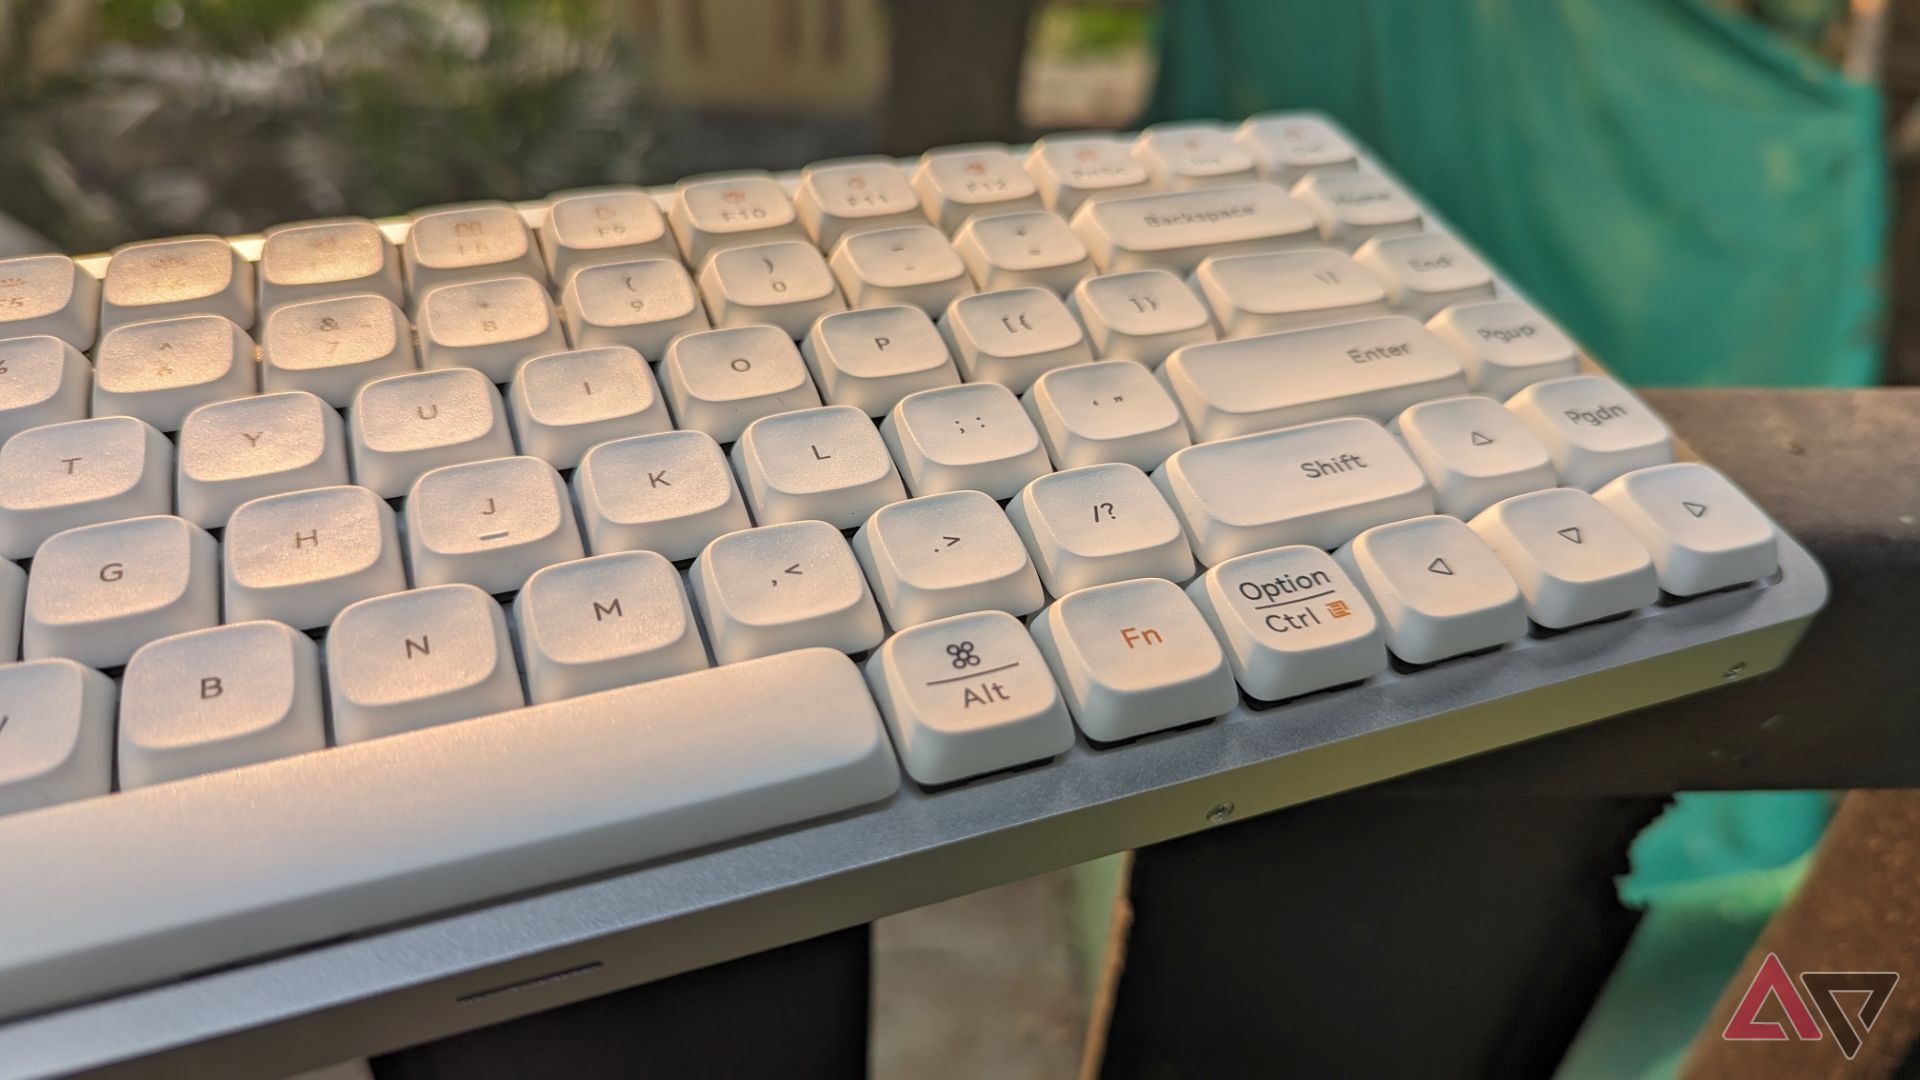 Lofree Flow review: This low-profile keyboard changed me